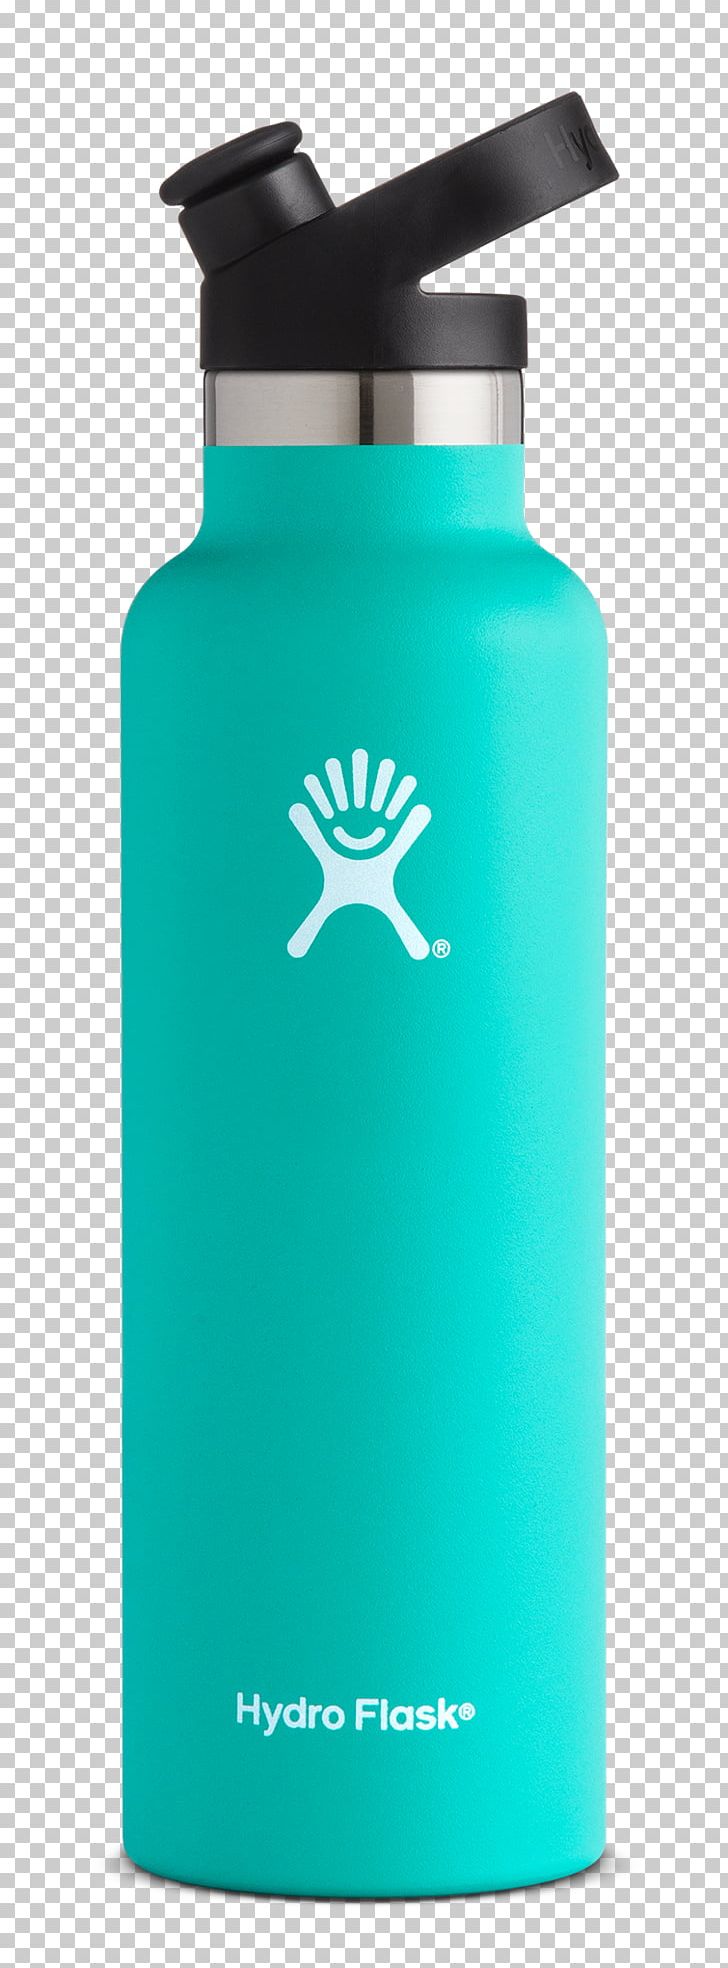 Hydro Flask Wide Mouth Water Bottles Sports Hydro Flask 21 Oz Double Wall Vacuum Insulated Stainless Steel PNG, Clipart, Bottle, Bpa, Drink, Drinkware, Flask Free PNG Download